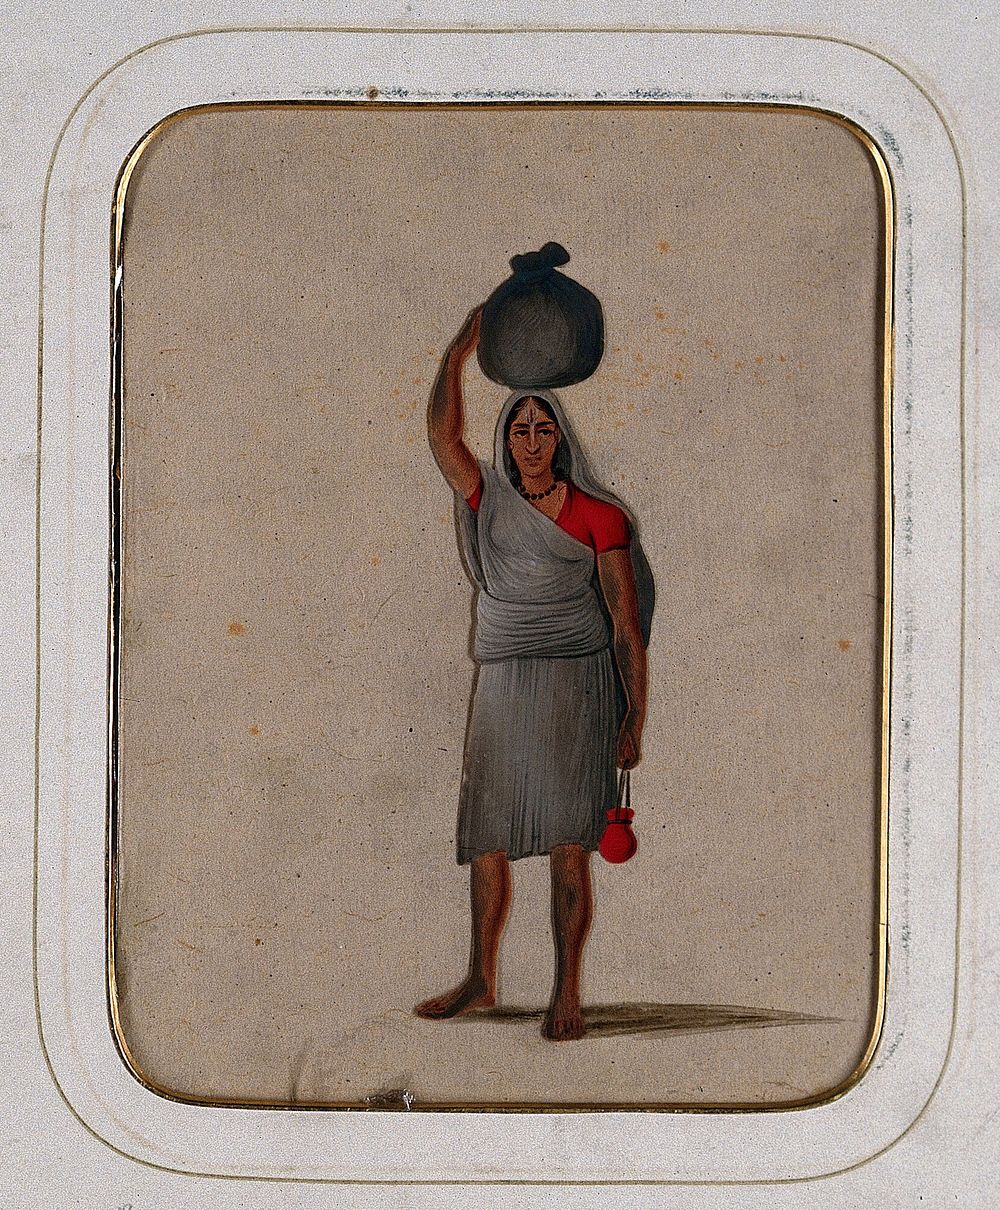 A woman with a Vishnu mark on her forehead, carrying a cloth bundle on her head. Gouache painting on mica by an Indian…